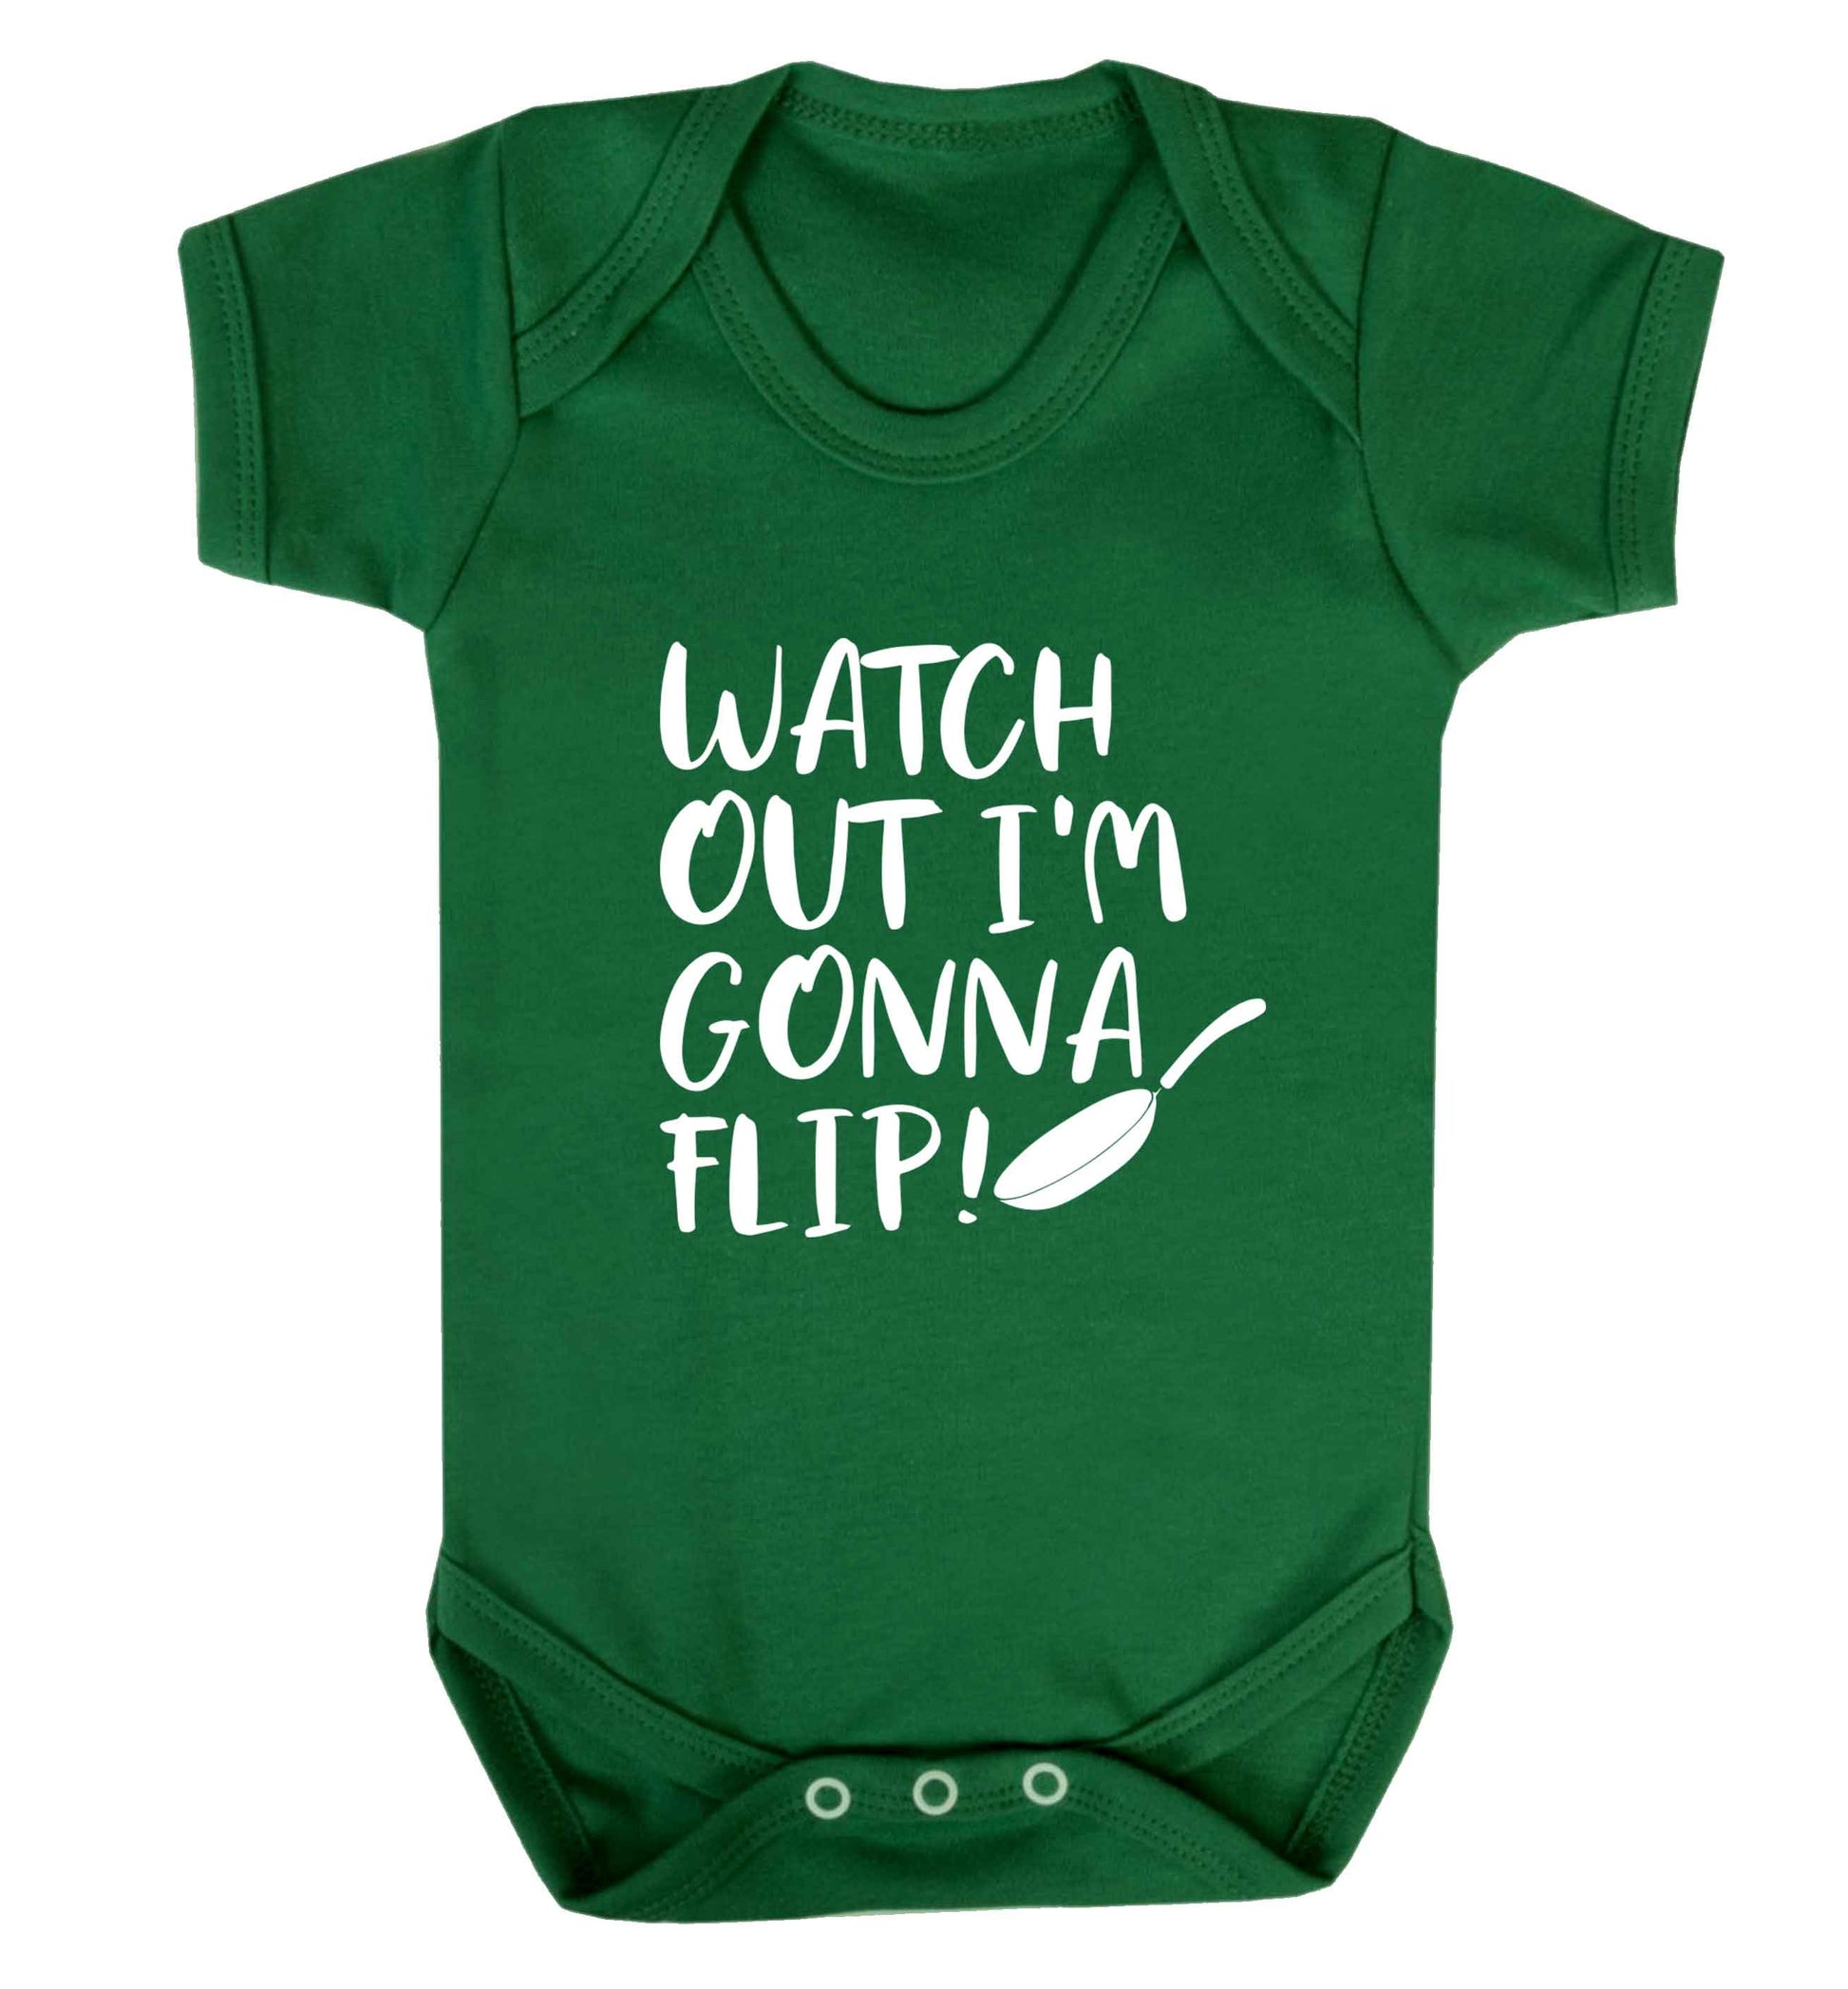 Watch out I'm gonna flip! baby vest green 18-24 months